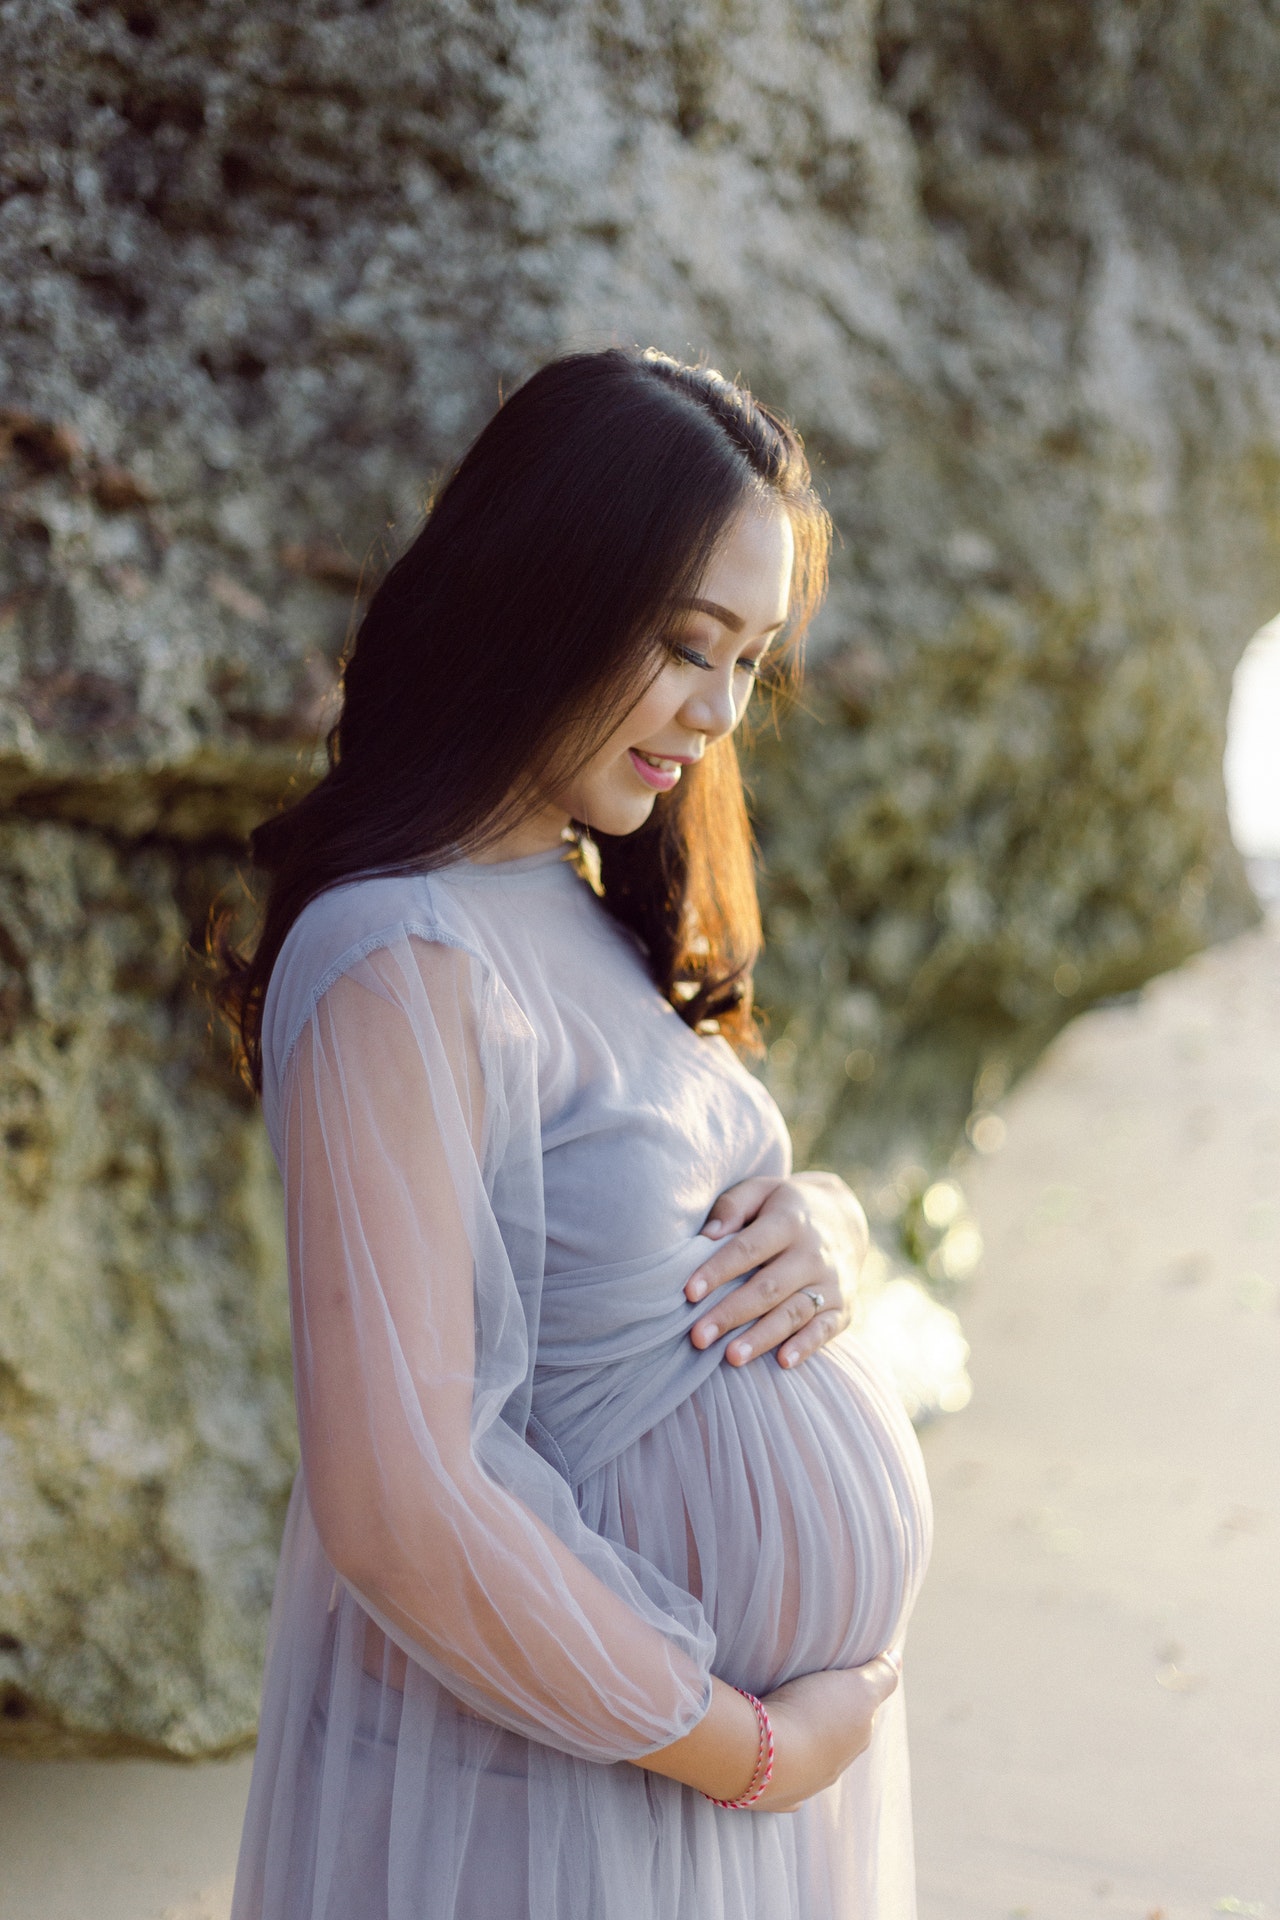 The Importance Of Ultrasound Screening During Pregnancy